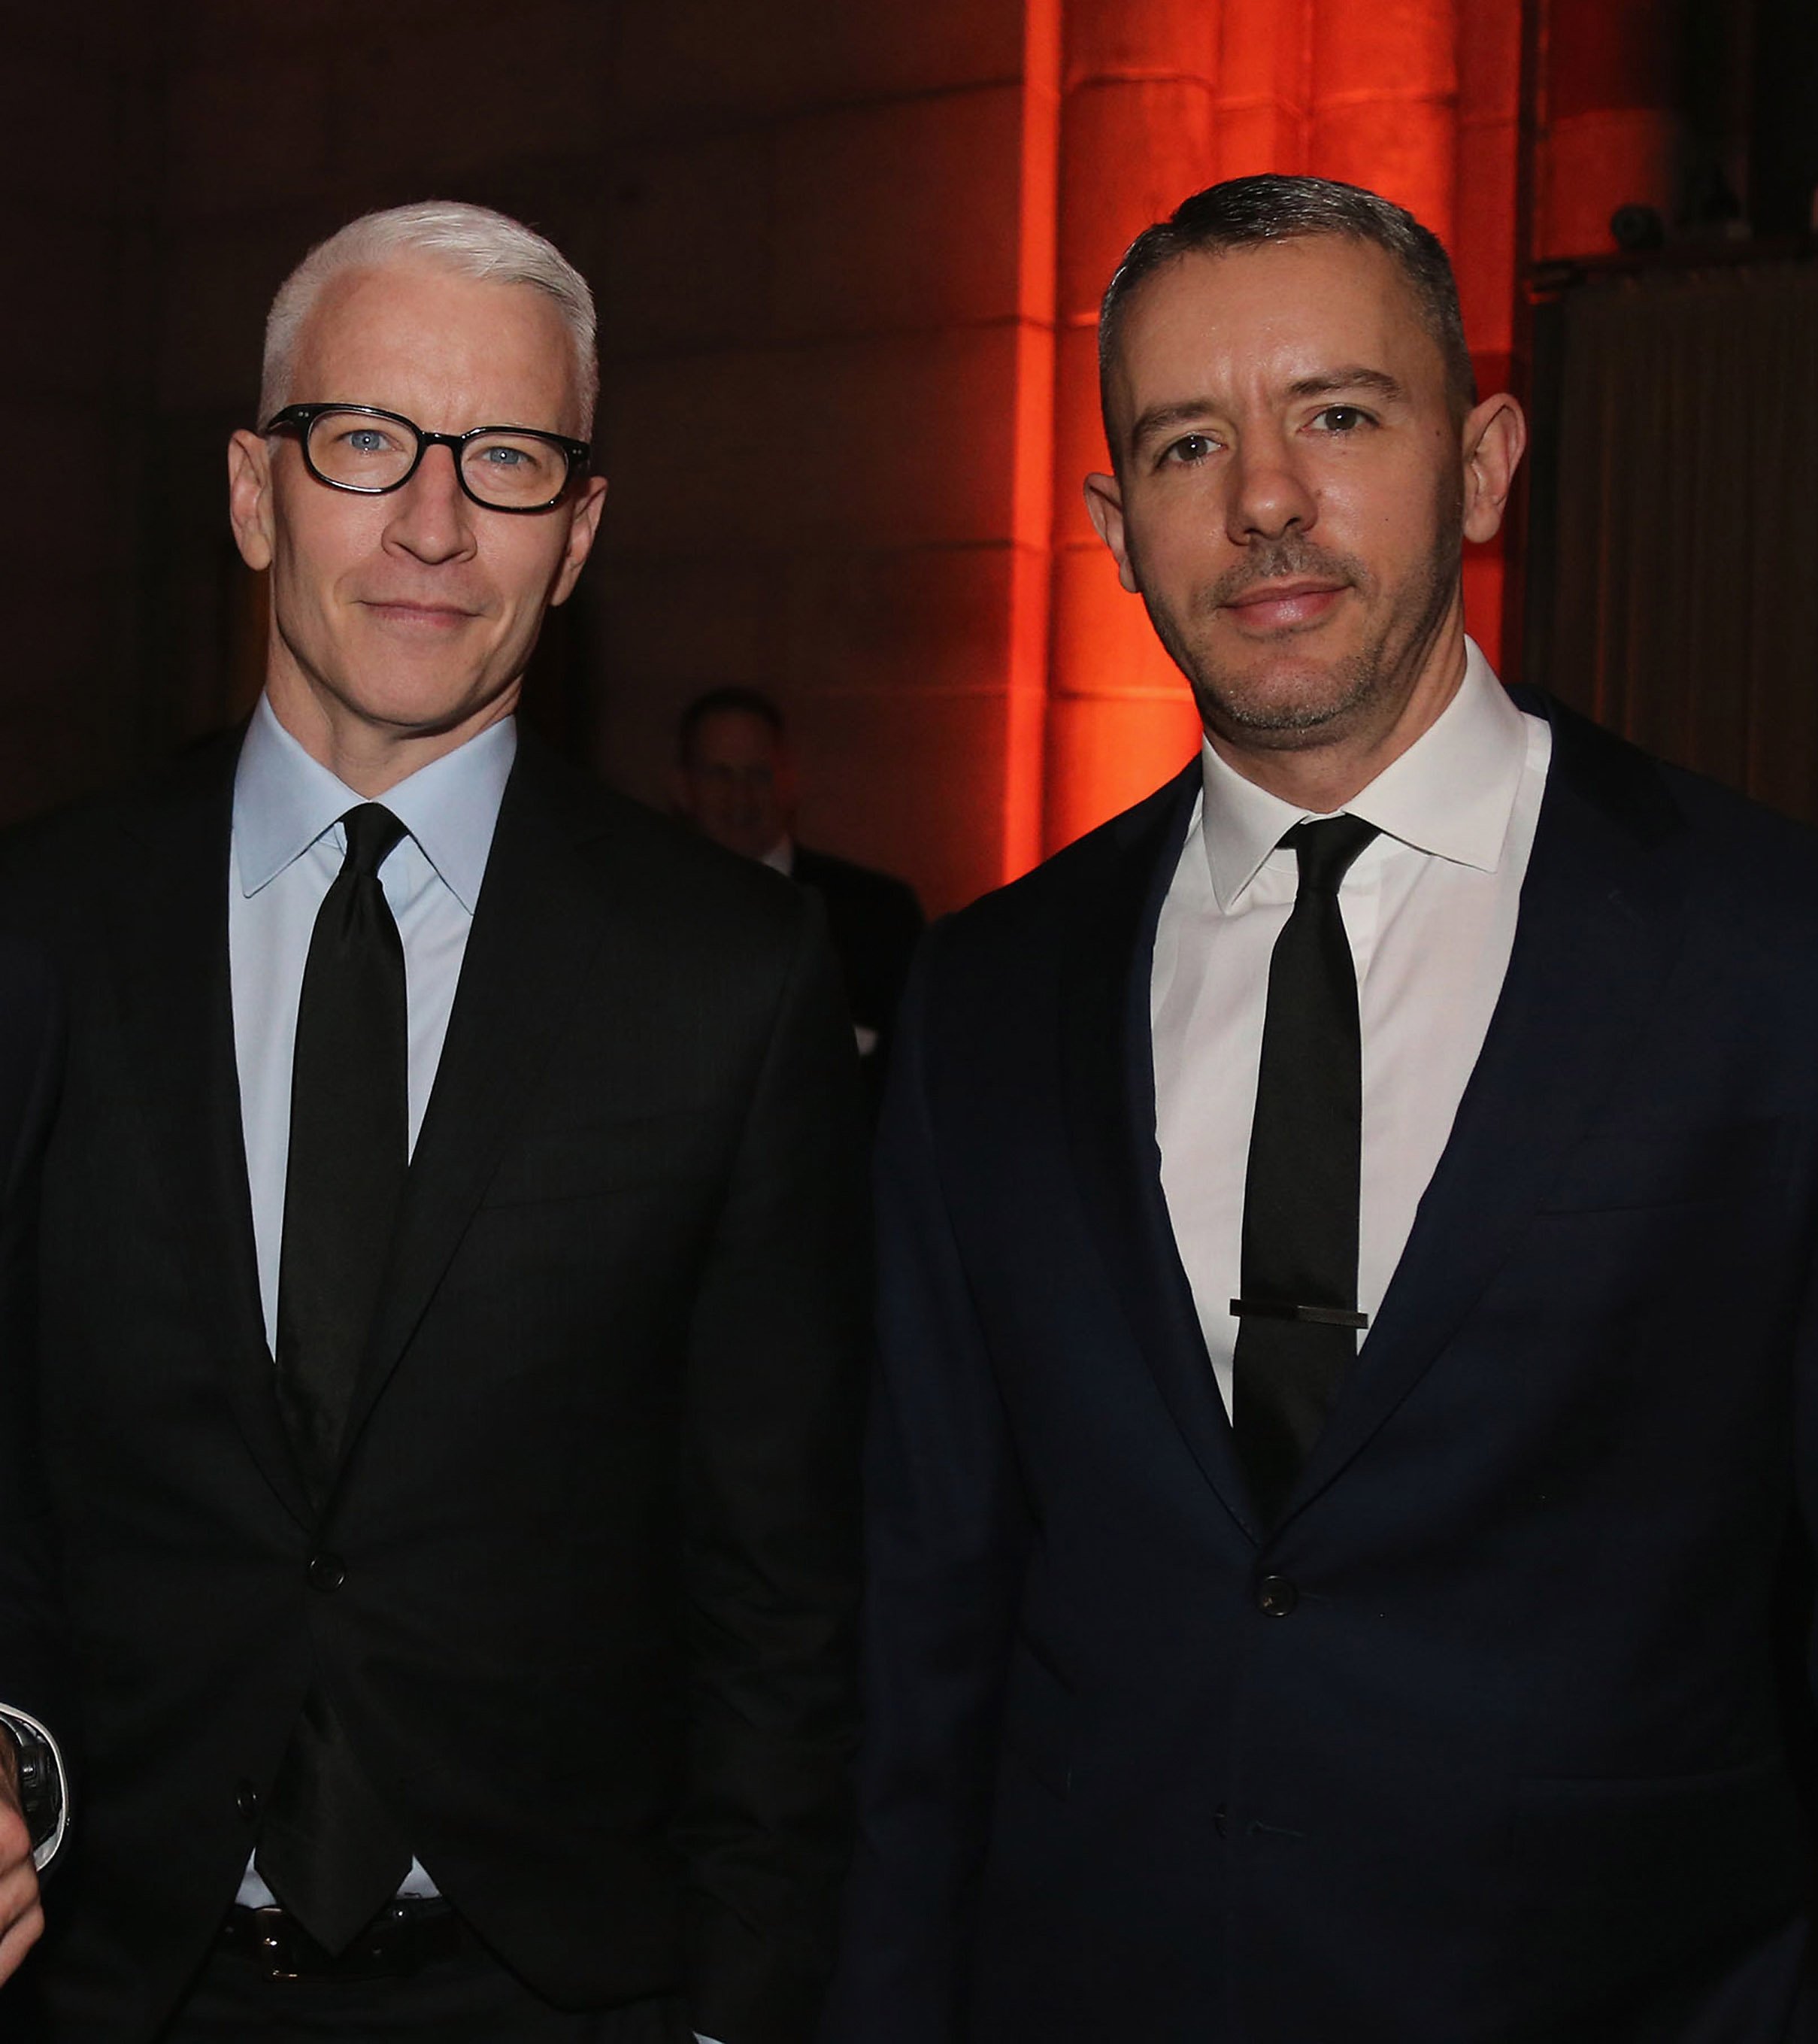 Anderson Cooper and Benjamin Maisani at the Windward School Benefit on March 10, 2018, in New York City. | Source: Getty Images